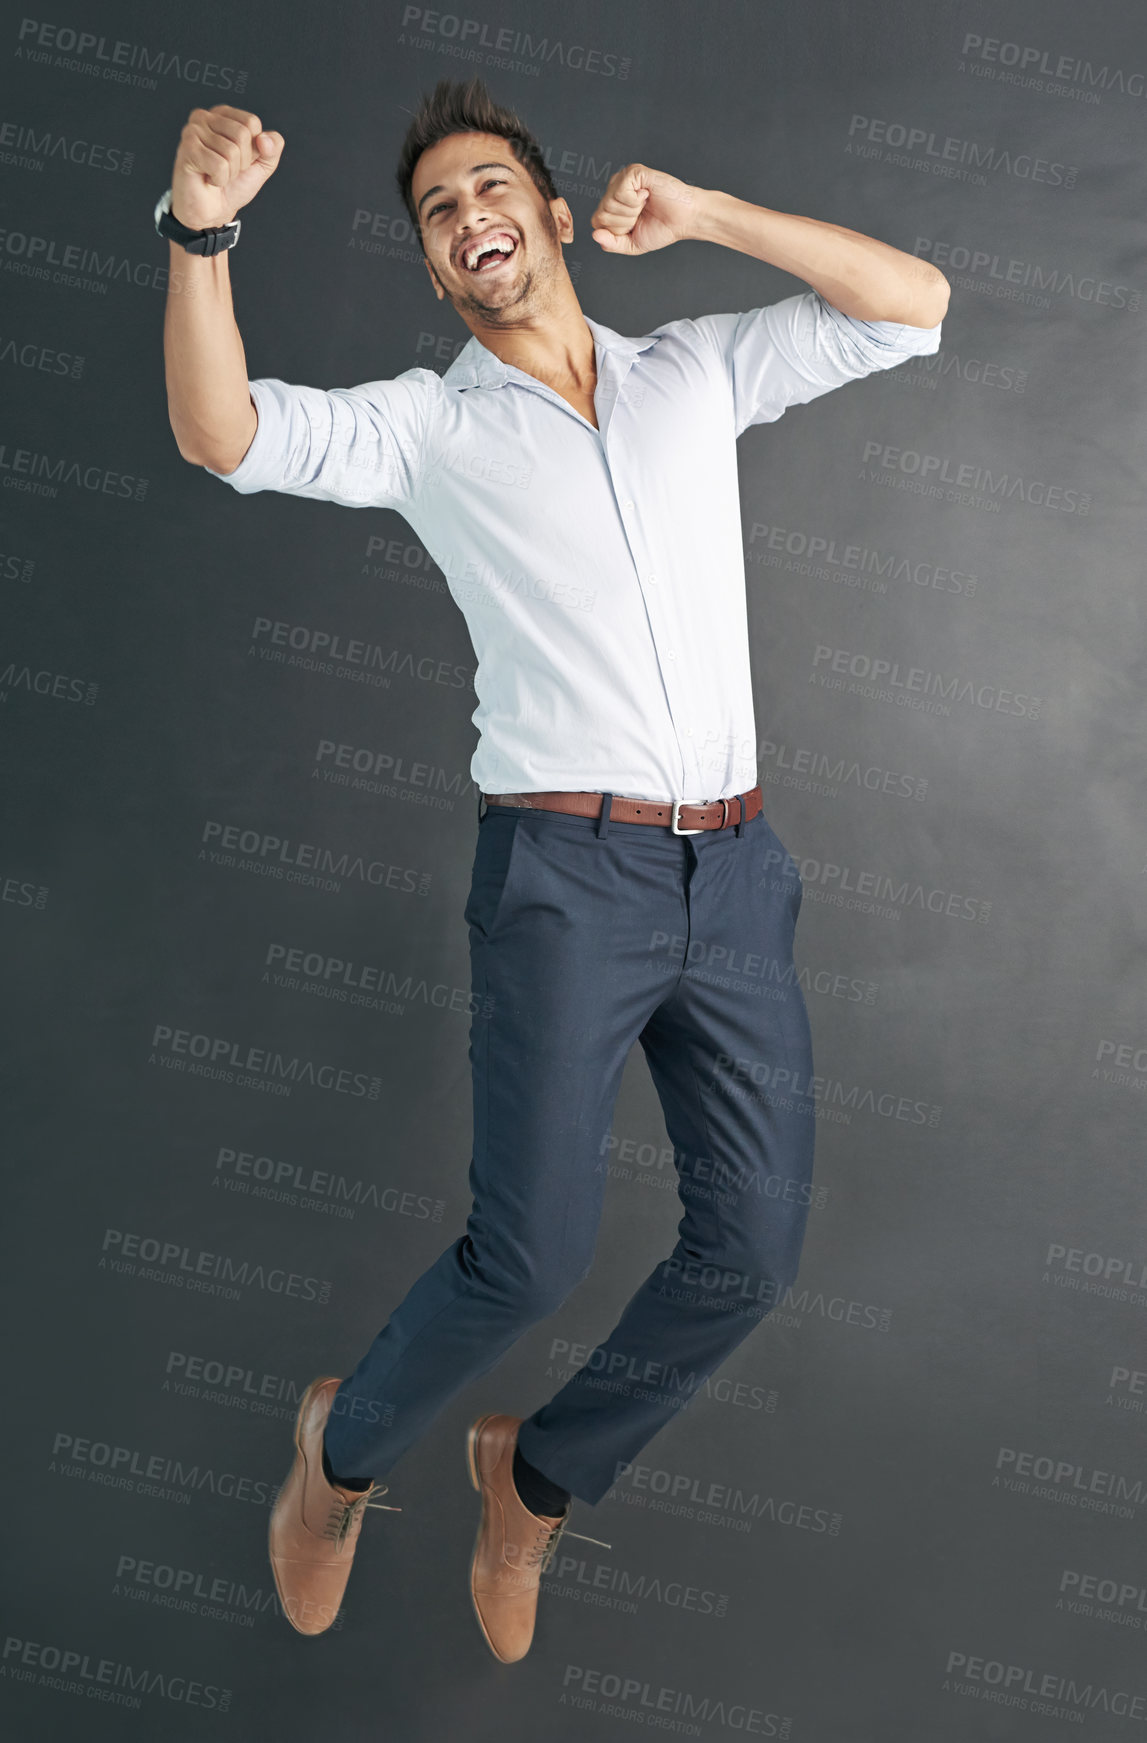 Buy stock photo Studio shot of a happy businessman jumping for joy